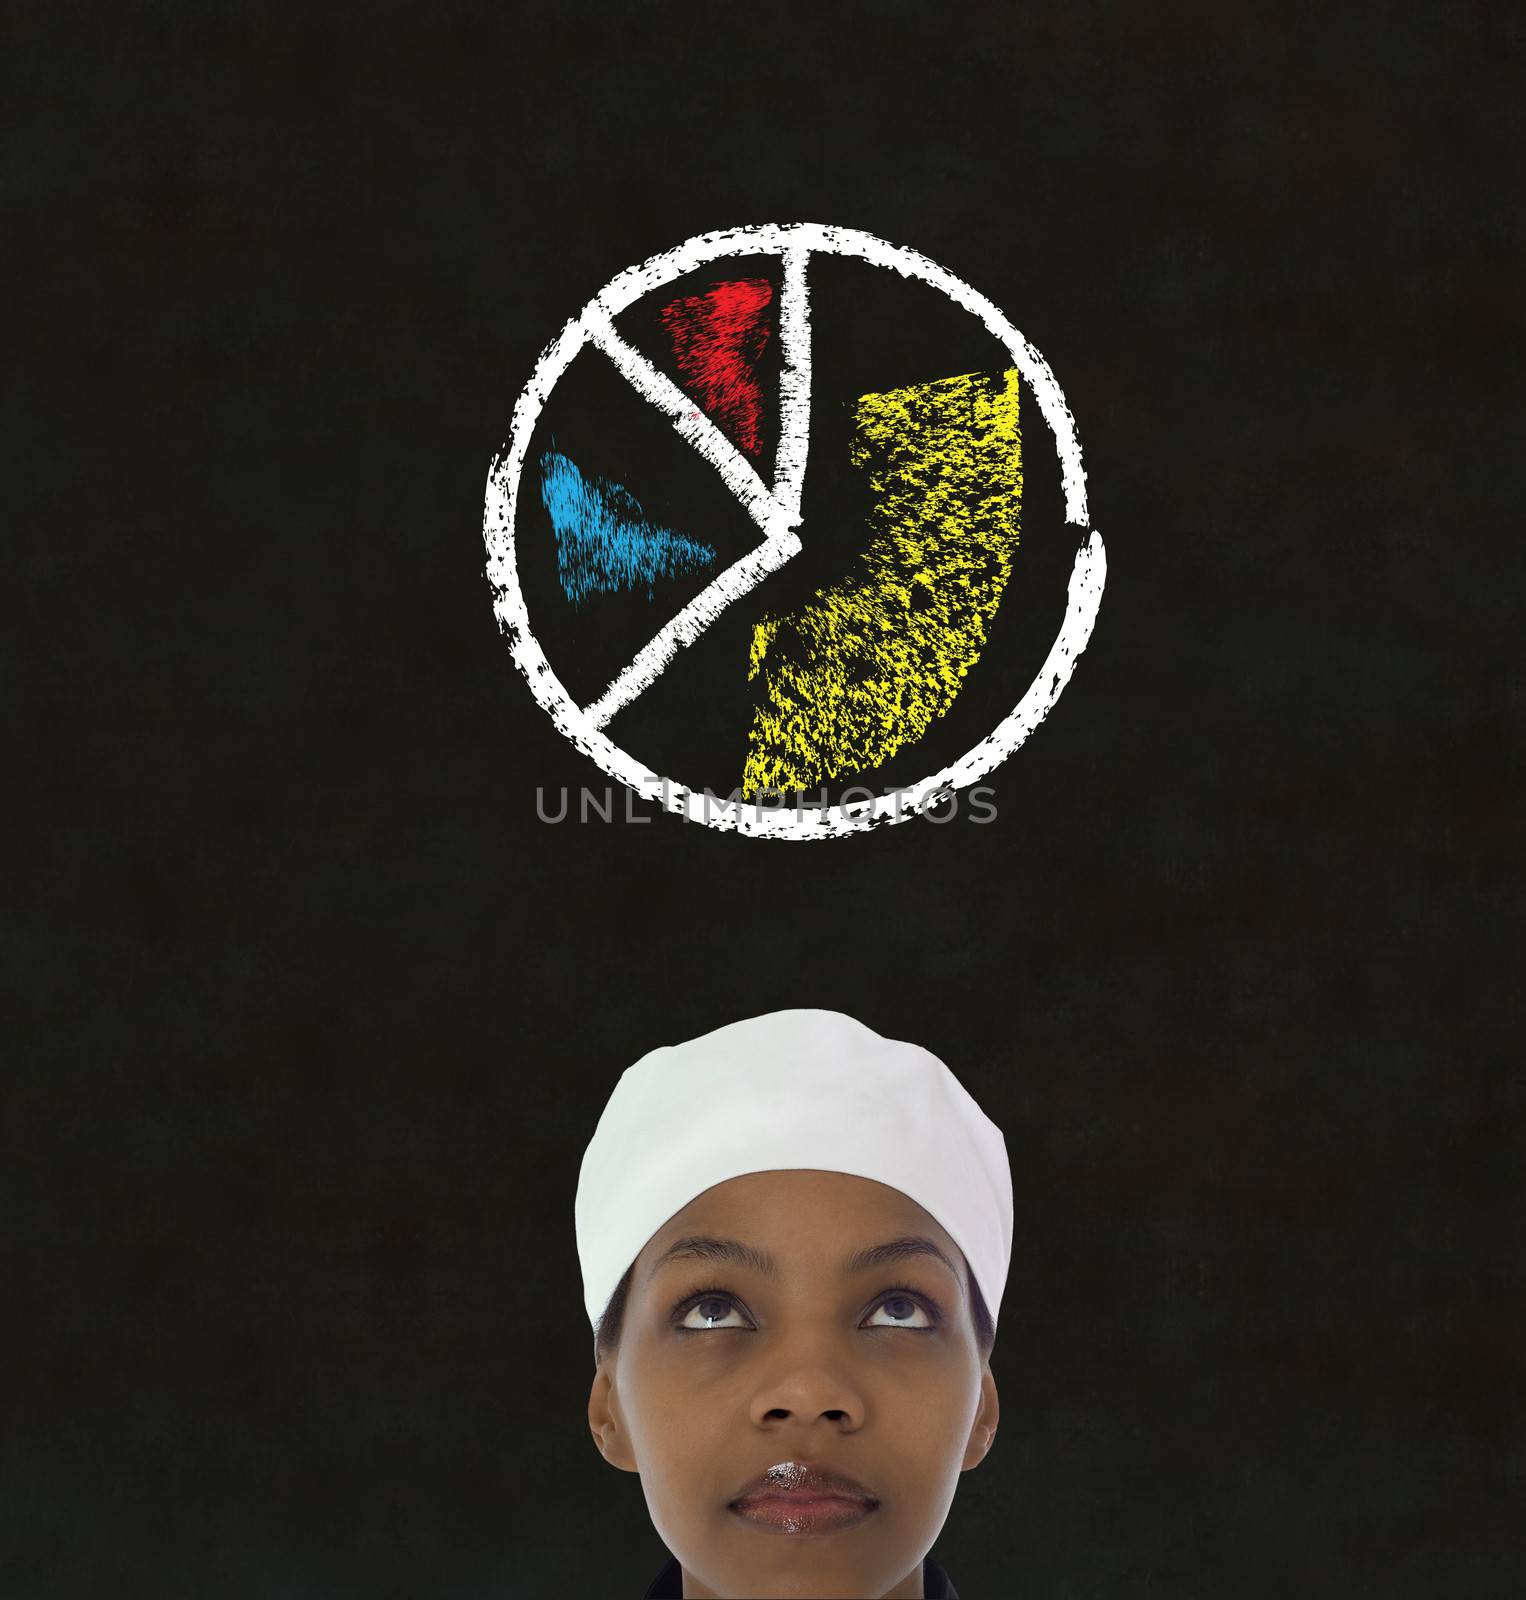 African American woman chef with chalk pie chart on blackboard background by alistaircotton